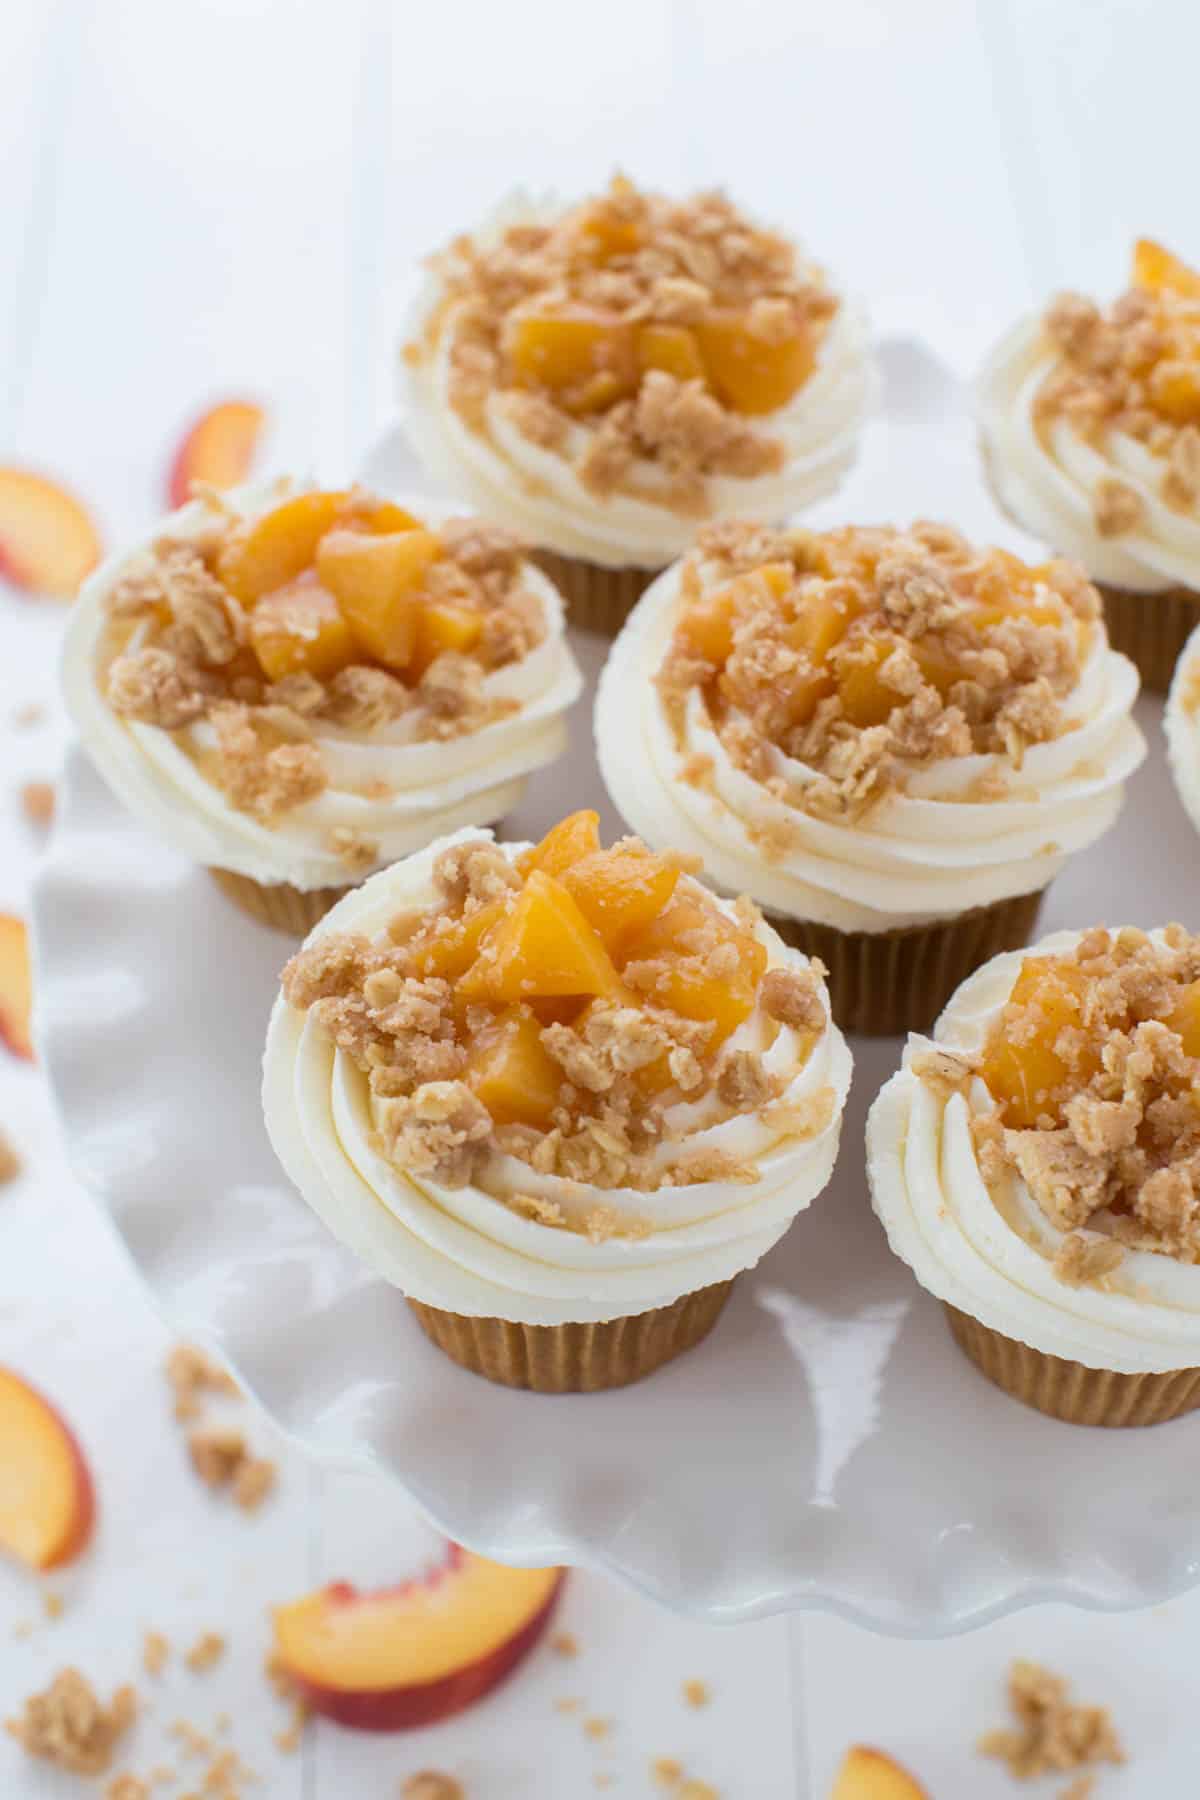 Peach pie cupcakes sit on top of a cupcake stand with slices of fresh peaches off to the side.